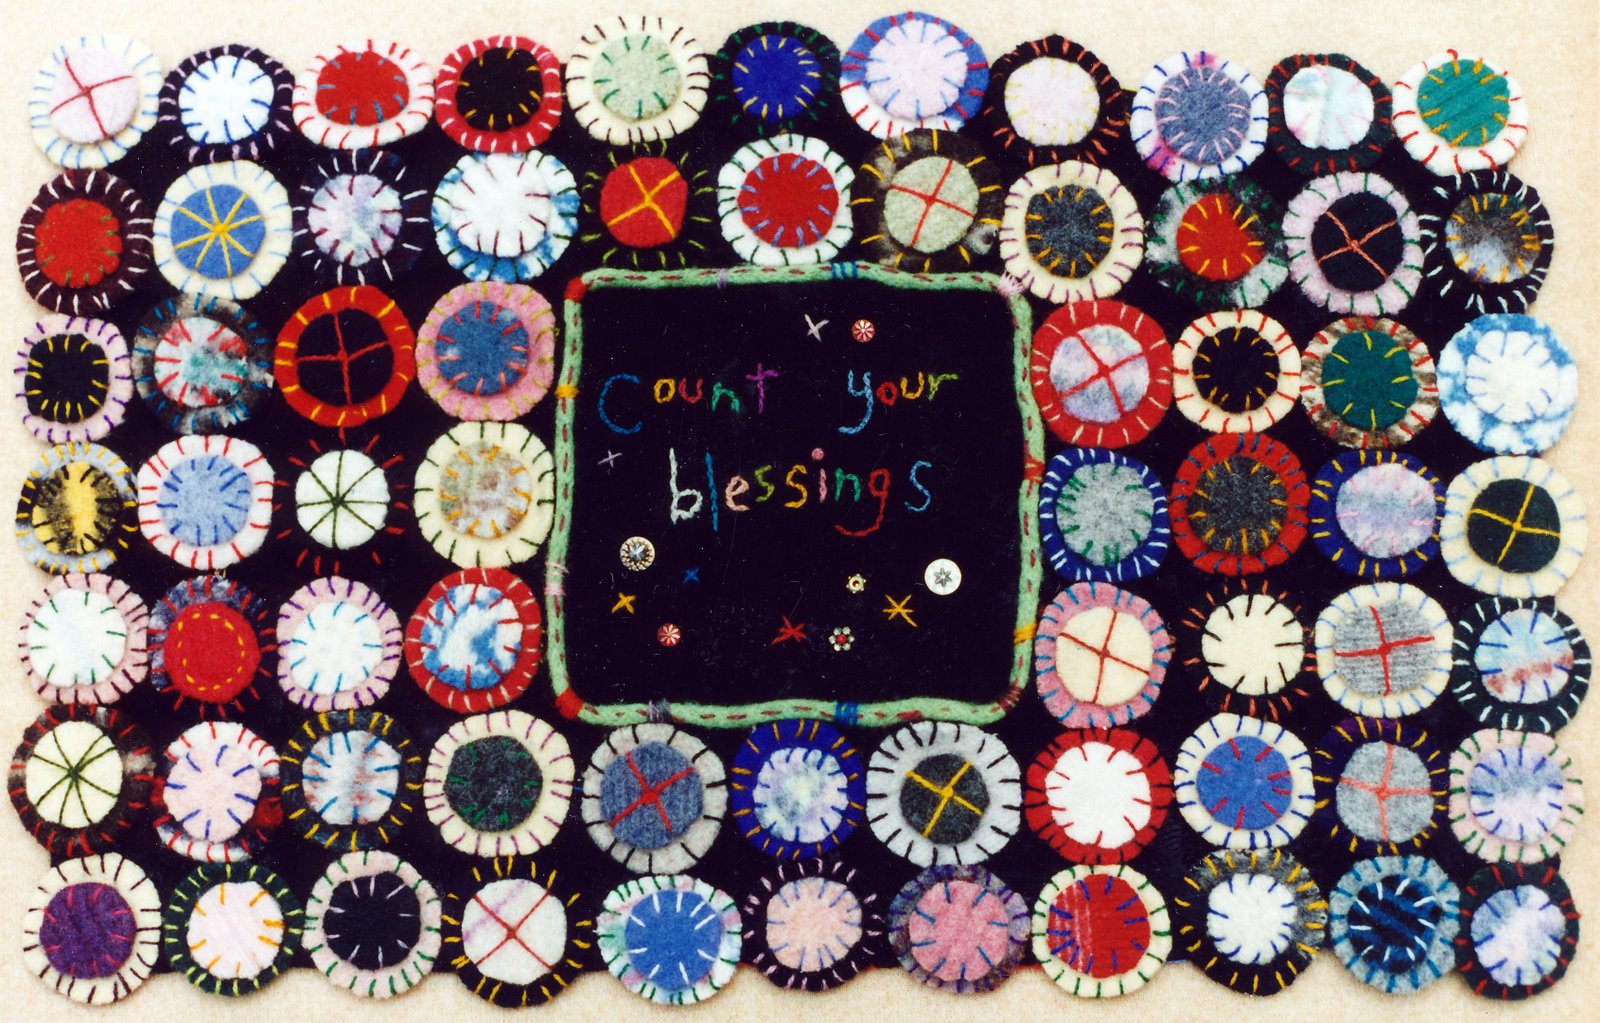 [penny+rug+count+your+blessings.jpg]